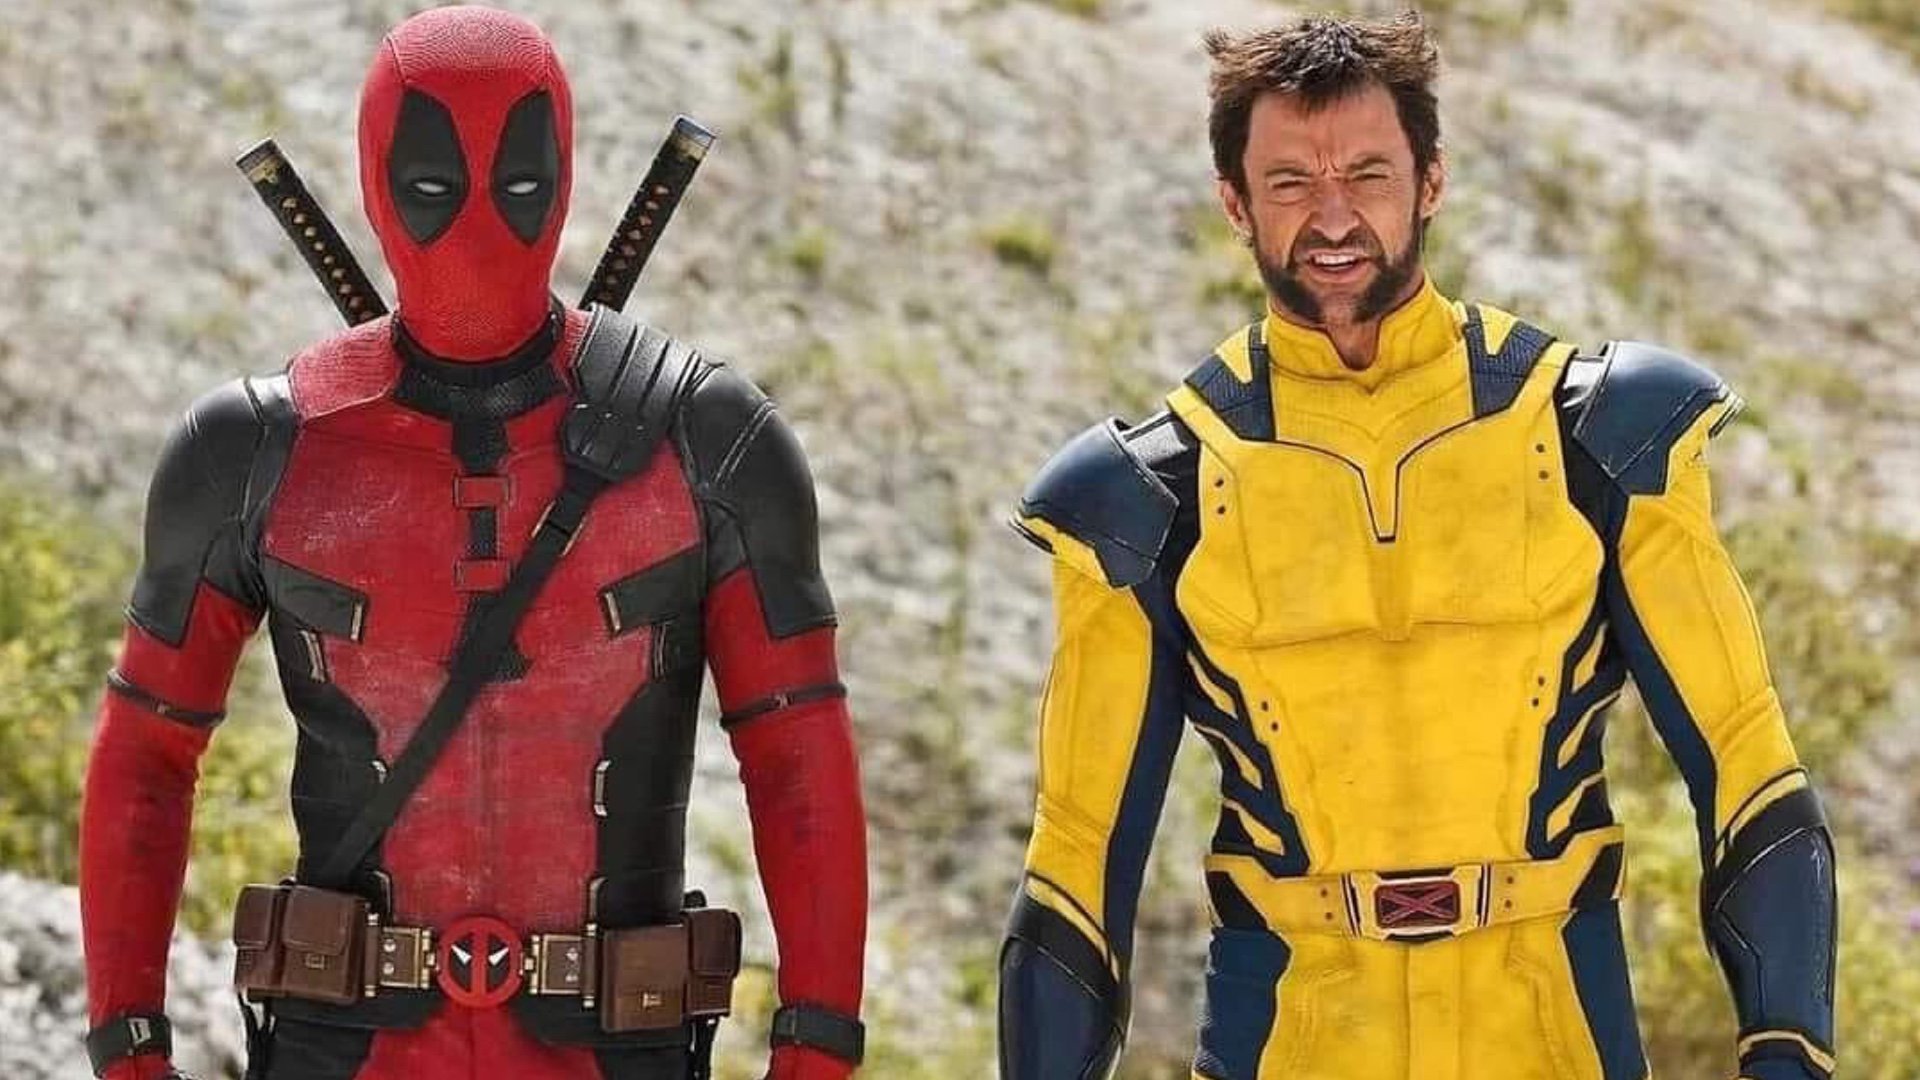 https://images.squarespace-cdn.com/content/v1/51b3dc8ee4b051b96ceb10de/fbdbfc75-bf58-4d20-8f3a-8820150cea4d/could-wolverine-from-deadpool-3-be-the-live-action-version-from-x-men-the-animated-series.jpg